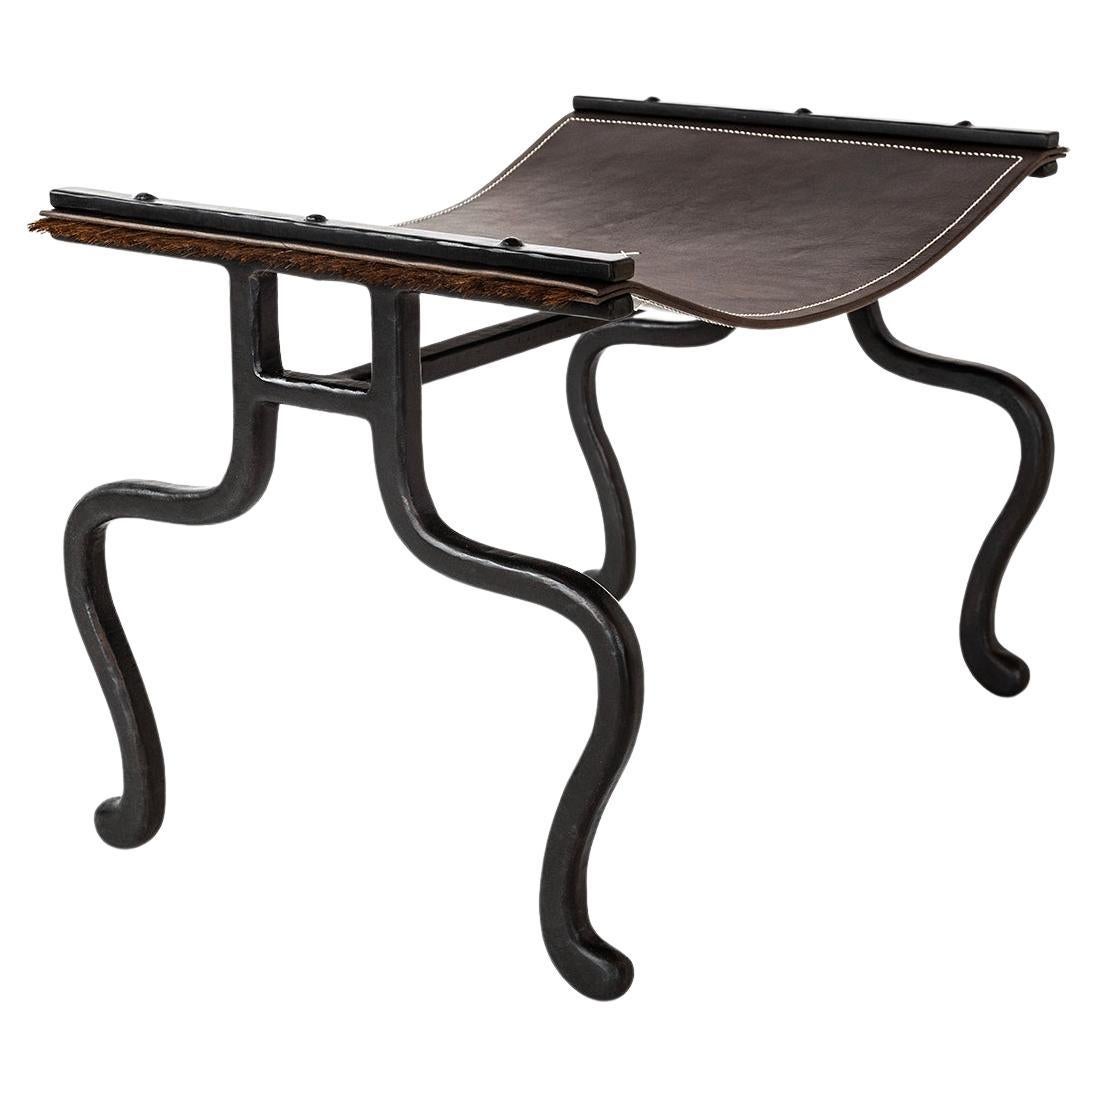 Bench Organic Contemporary Blackened Steel and Saddle Leather with Horsehair